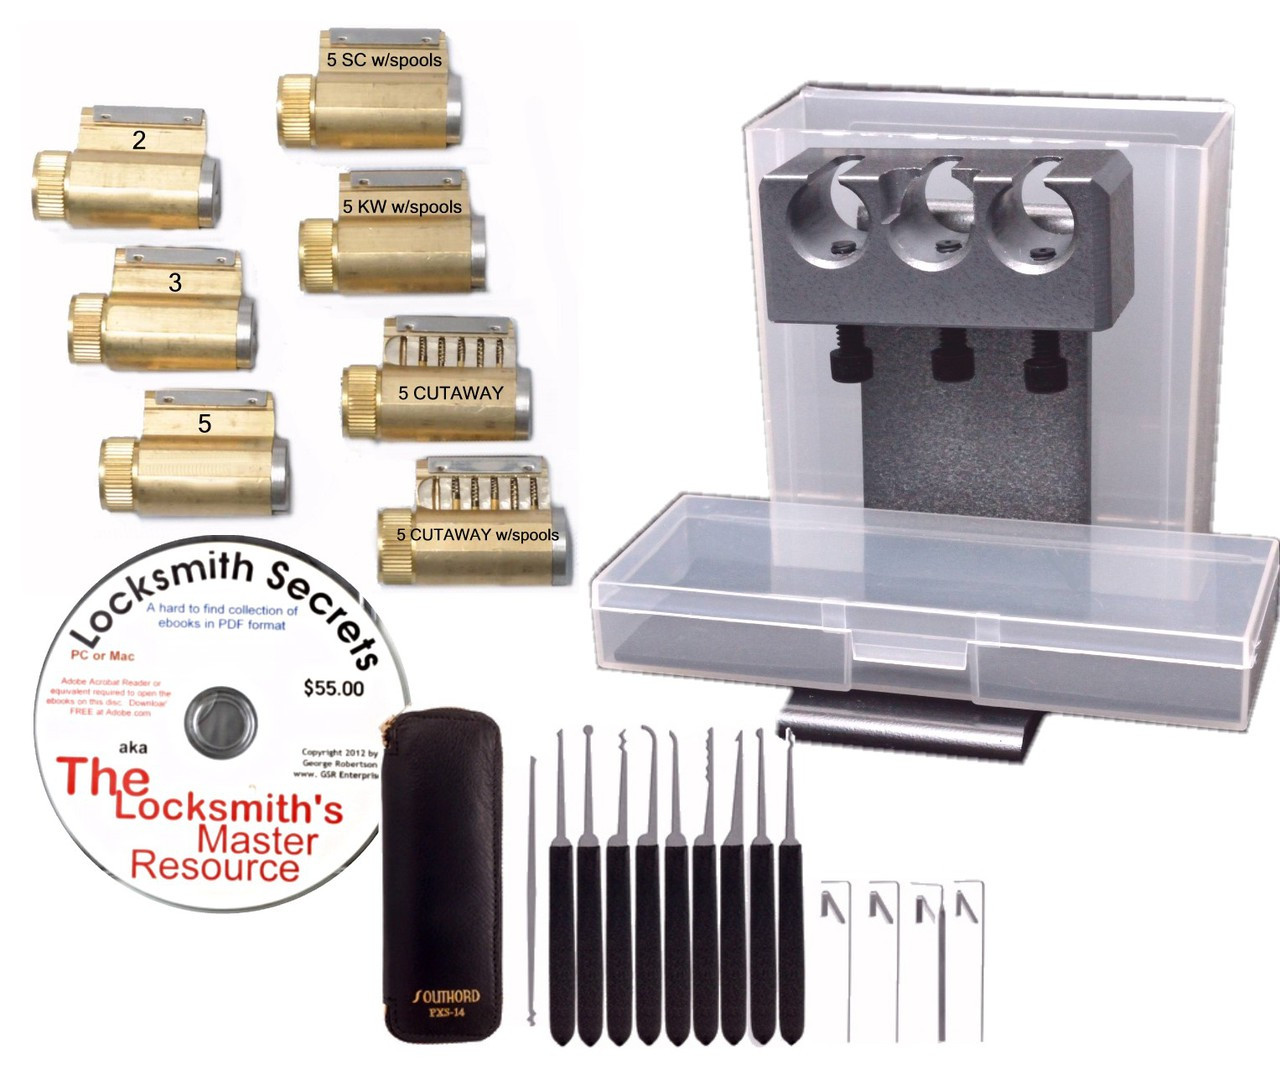 Nylon Zelden band Advanced Lock Picking Practice Kit - A Complete Kit for More Advanced Users